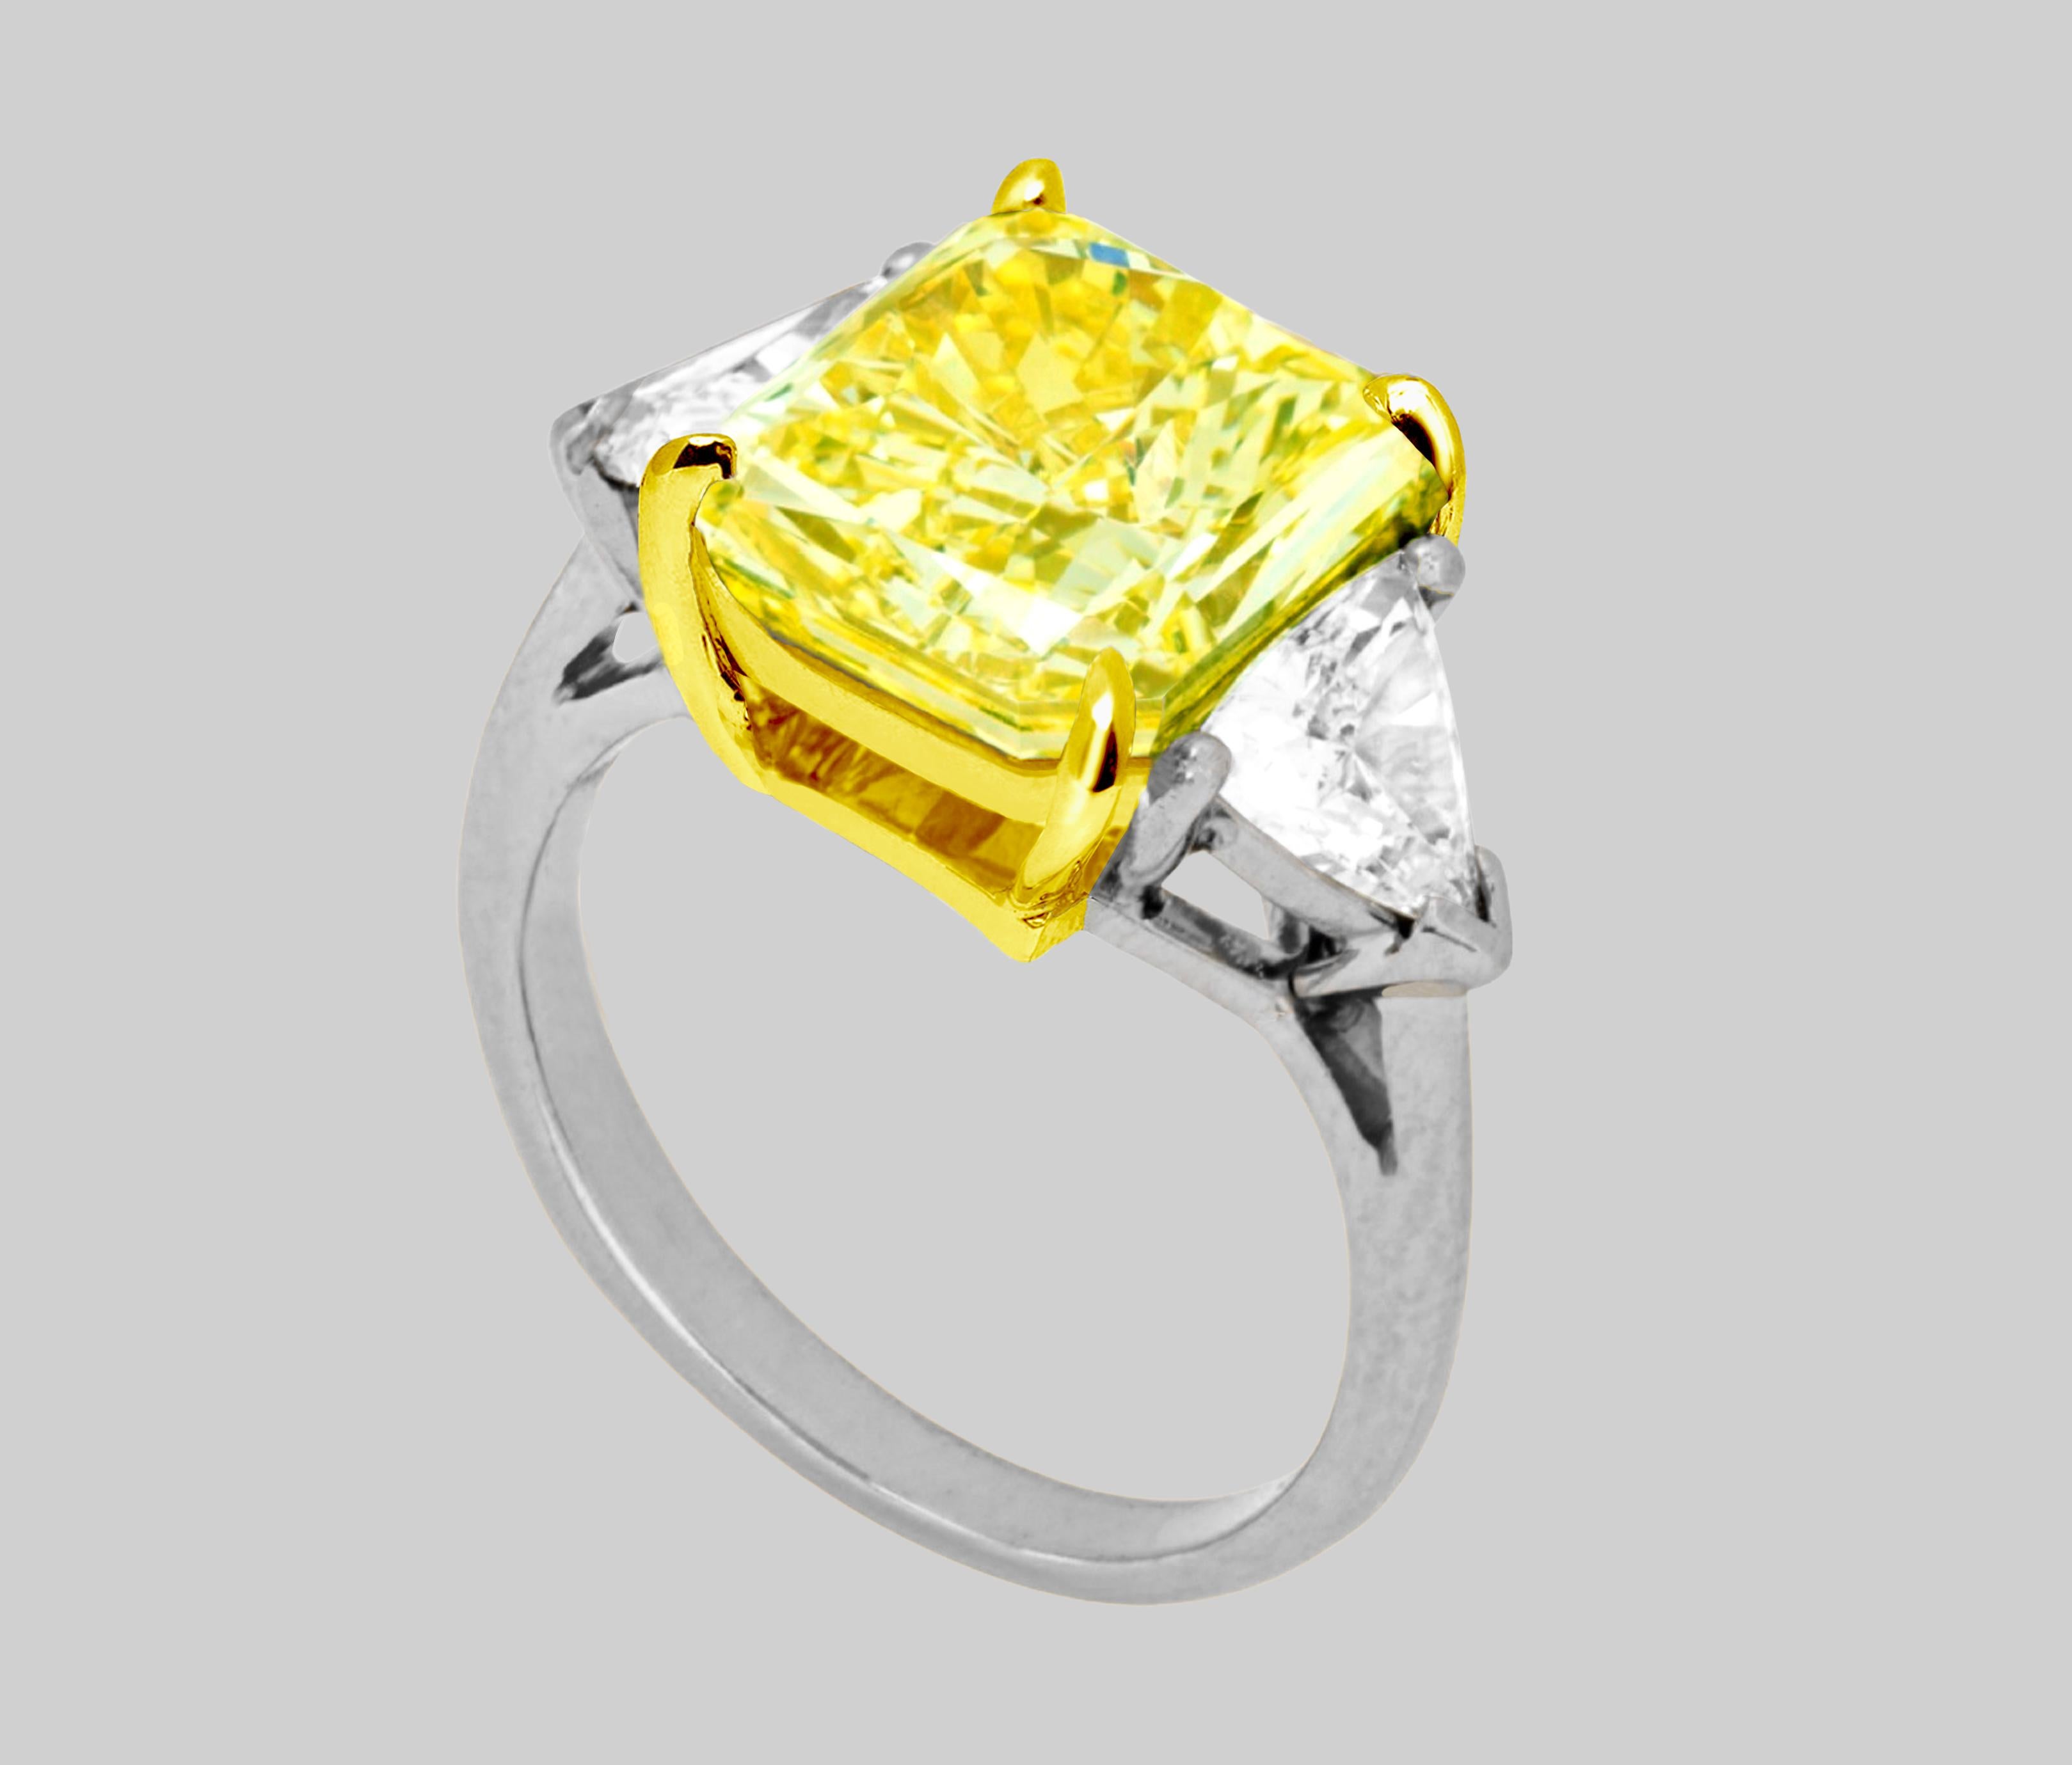 Absolutely, here's a description of this exquisite piece of jewelry:

This magnificent ring features a central diamond that is a true masterpiece of nature and craftsmanship. The main stone is a radiant-cut diamond, weighing an impressive 4.01